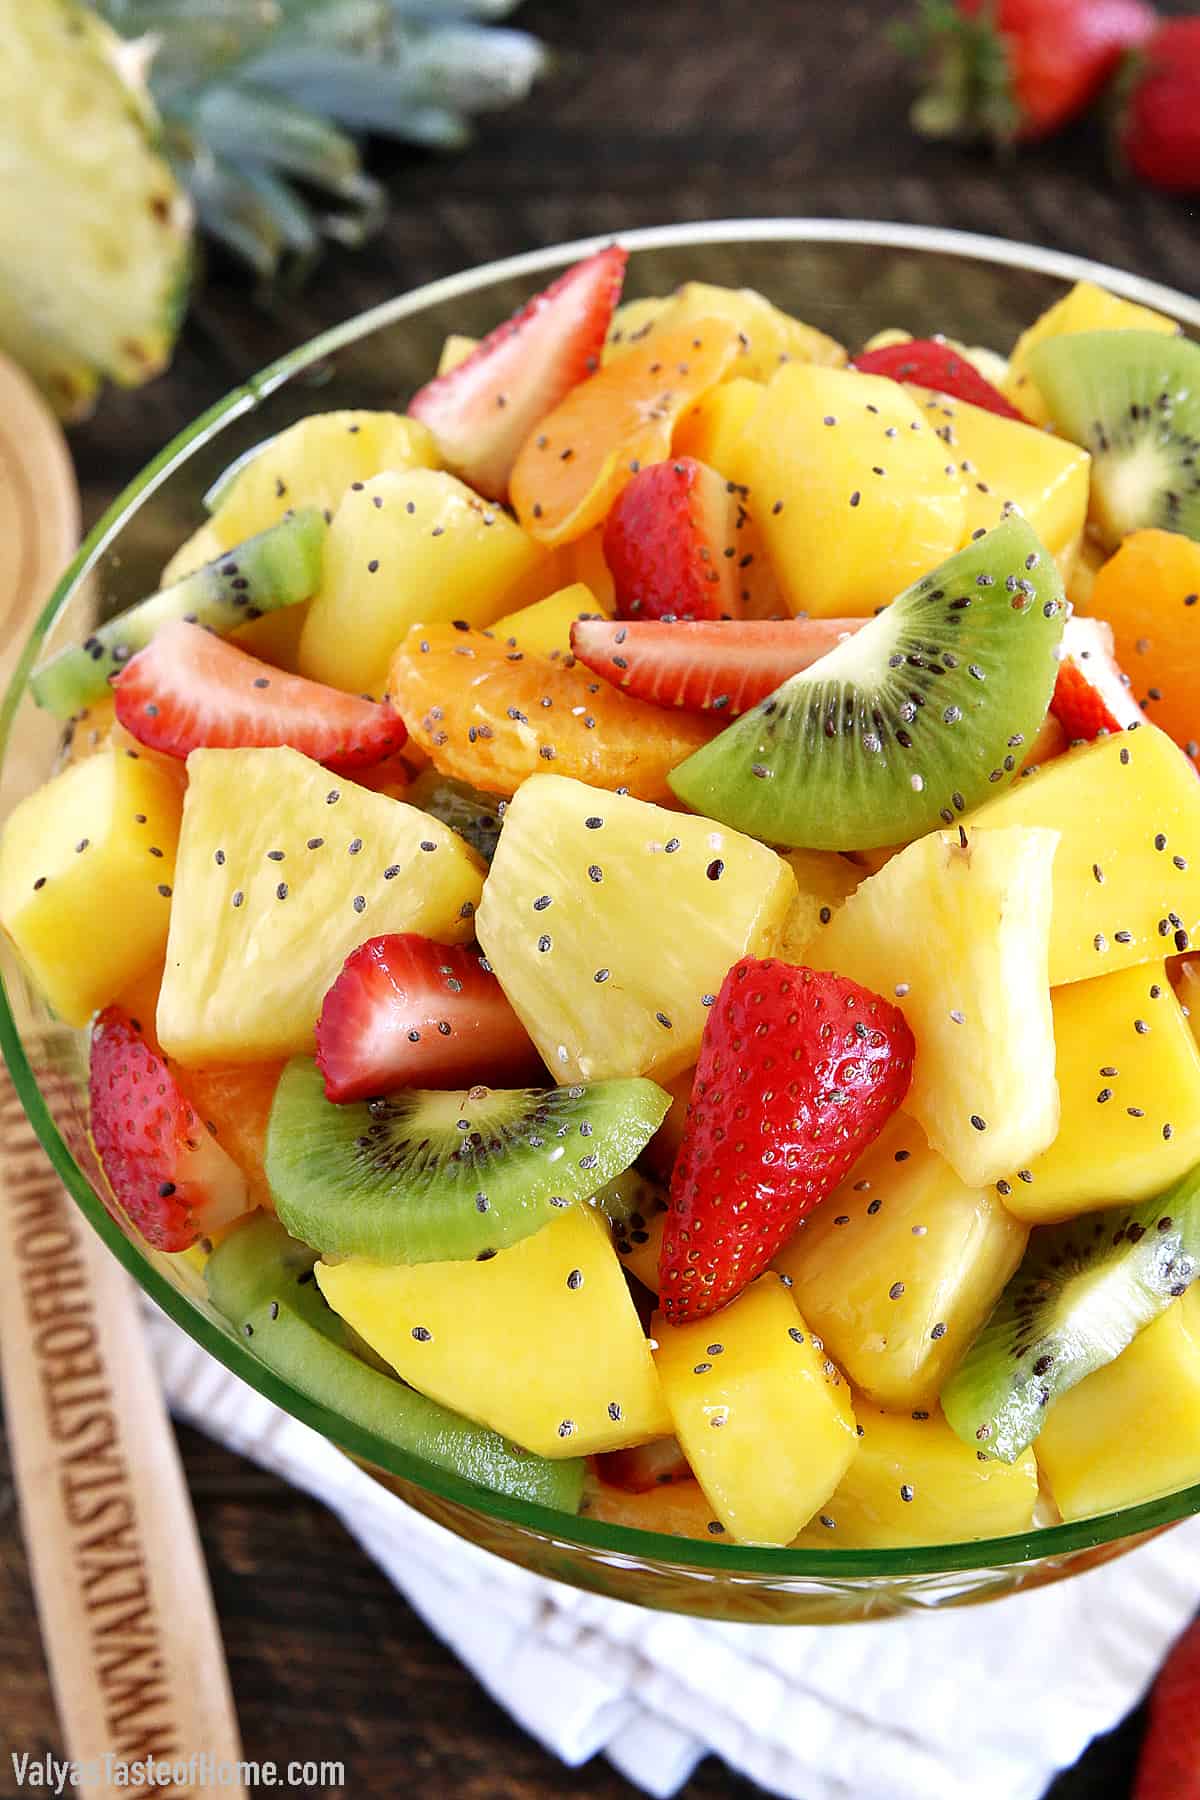 This Tropical Fruit Salad is a great addition to your meal as a dessert or it can be a perfect snack any time of the year especially during hot summer days.